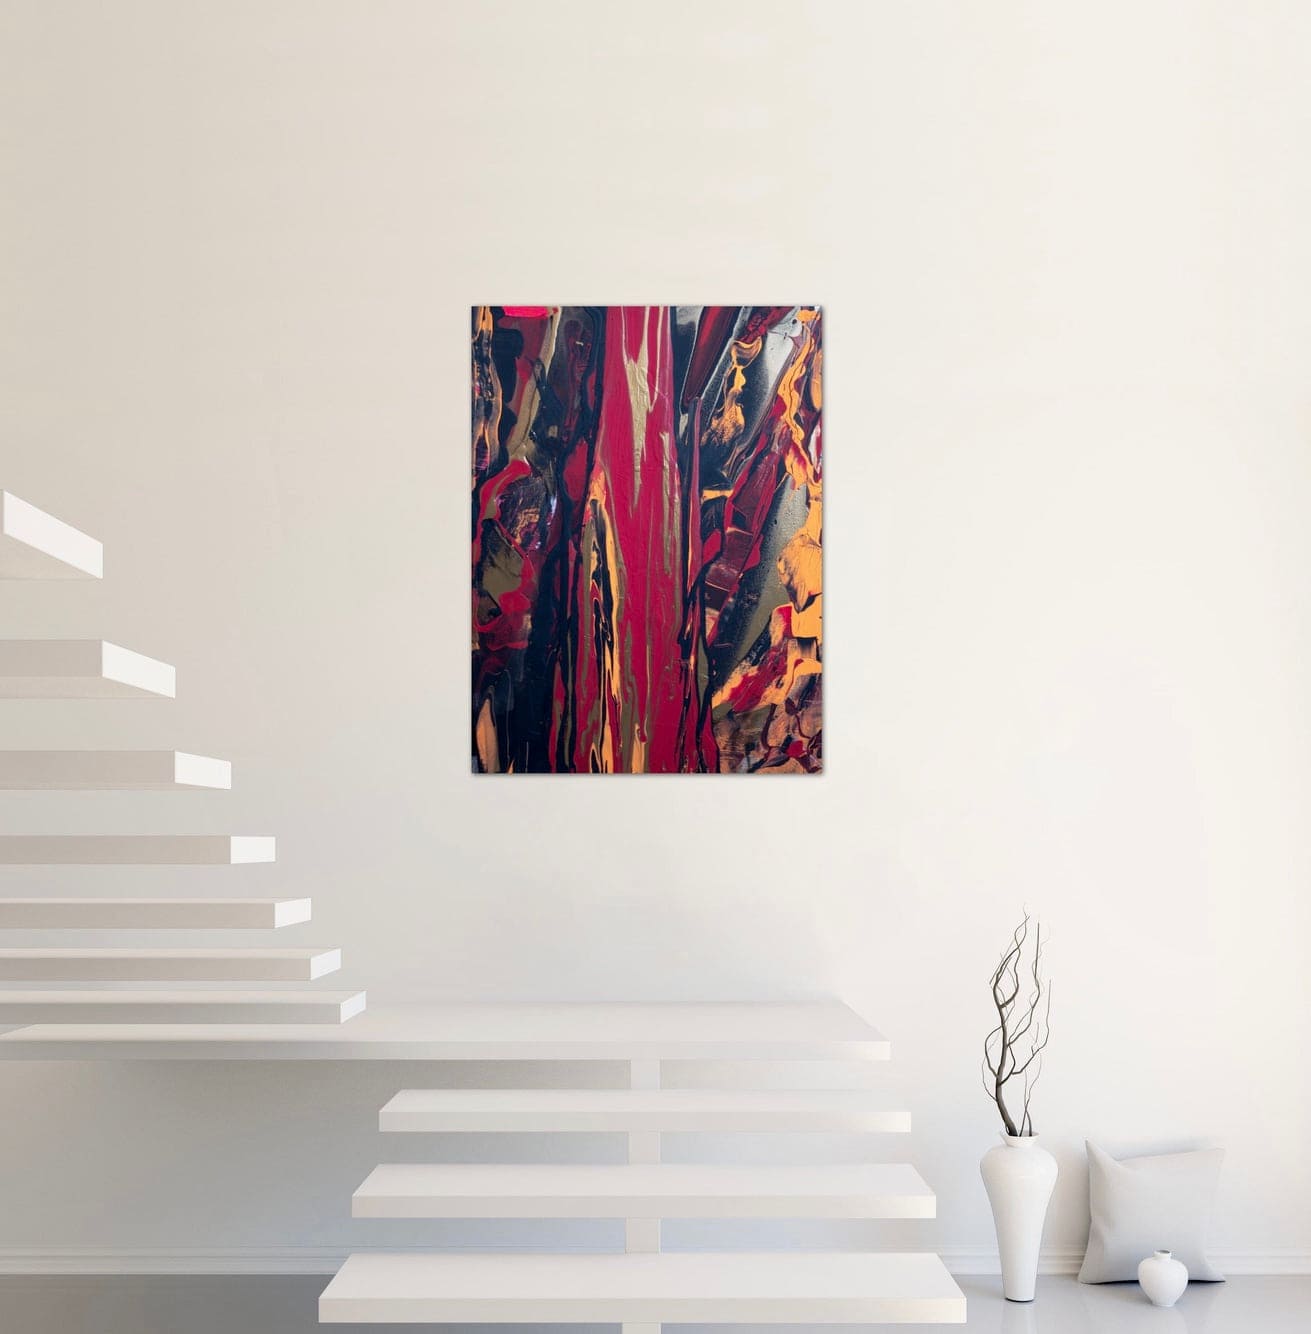 Pillar Of Truth - Medium Size, Bold With Gold Accents, Acrylic On Canvas, Original Design Painting, by Art with Evie